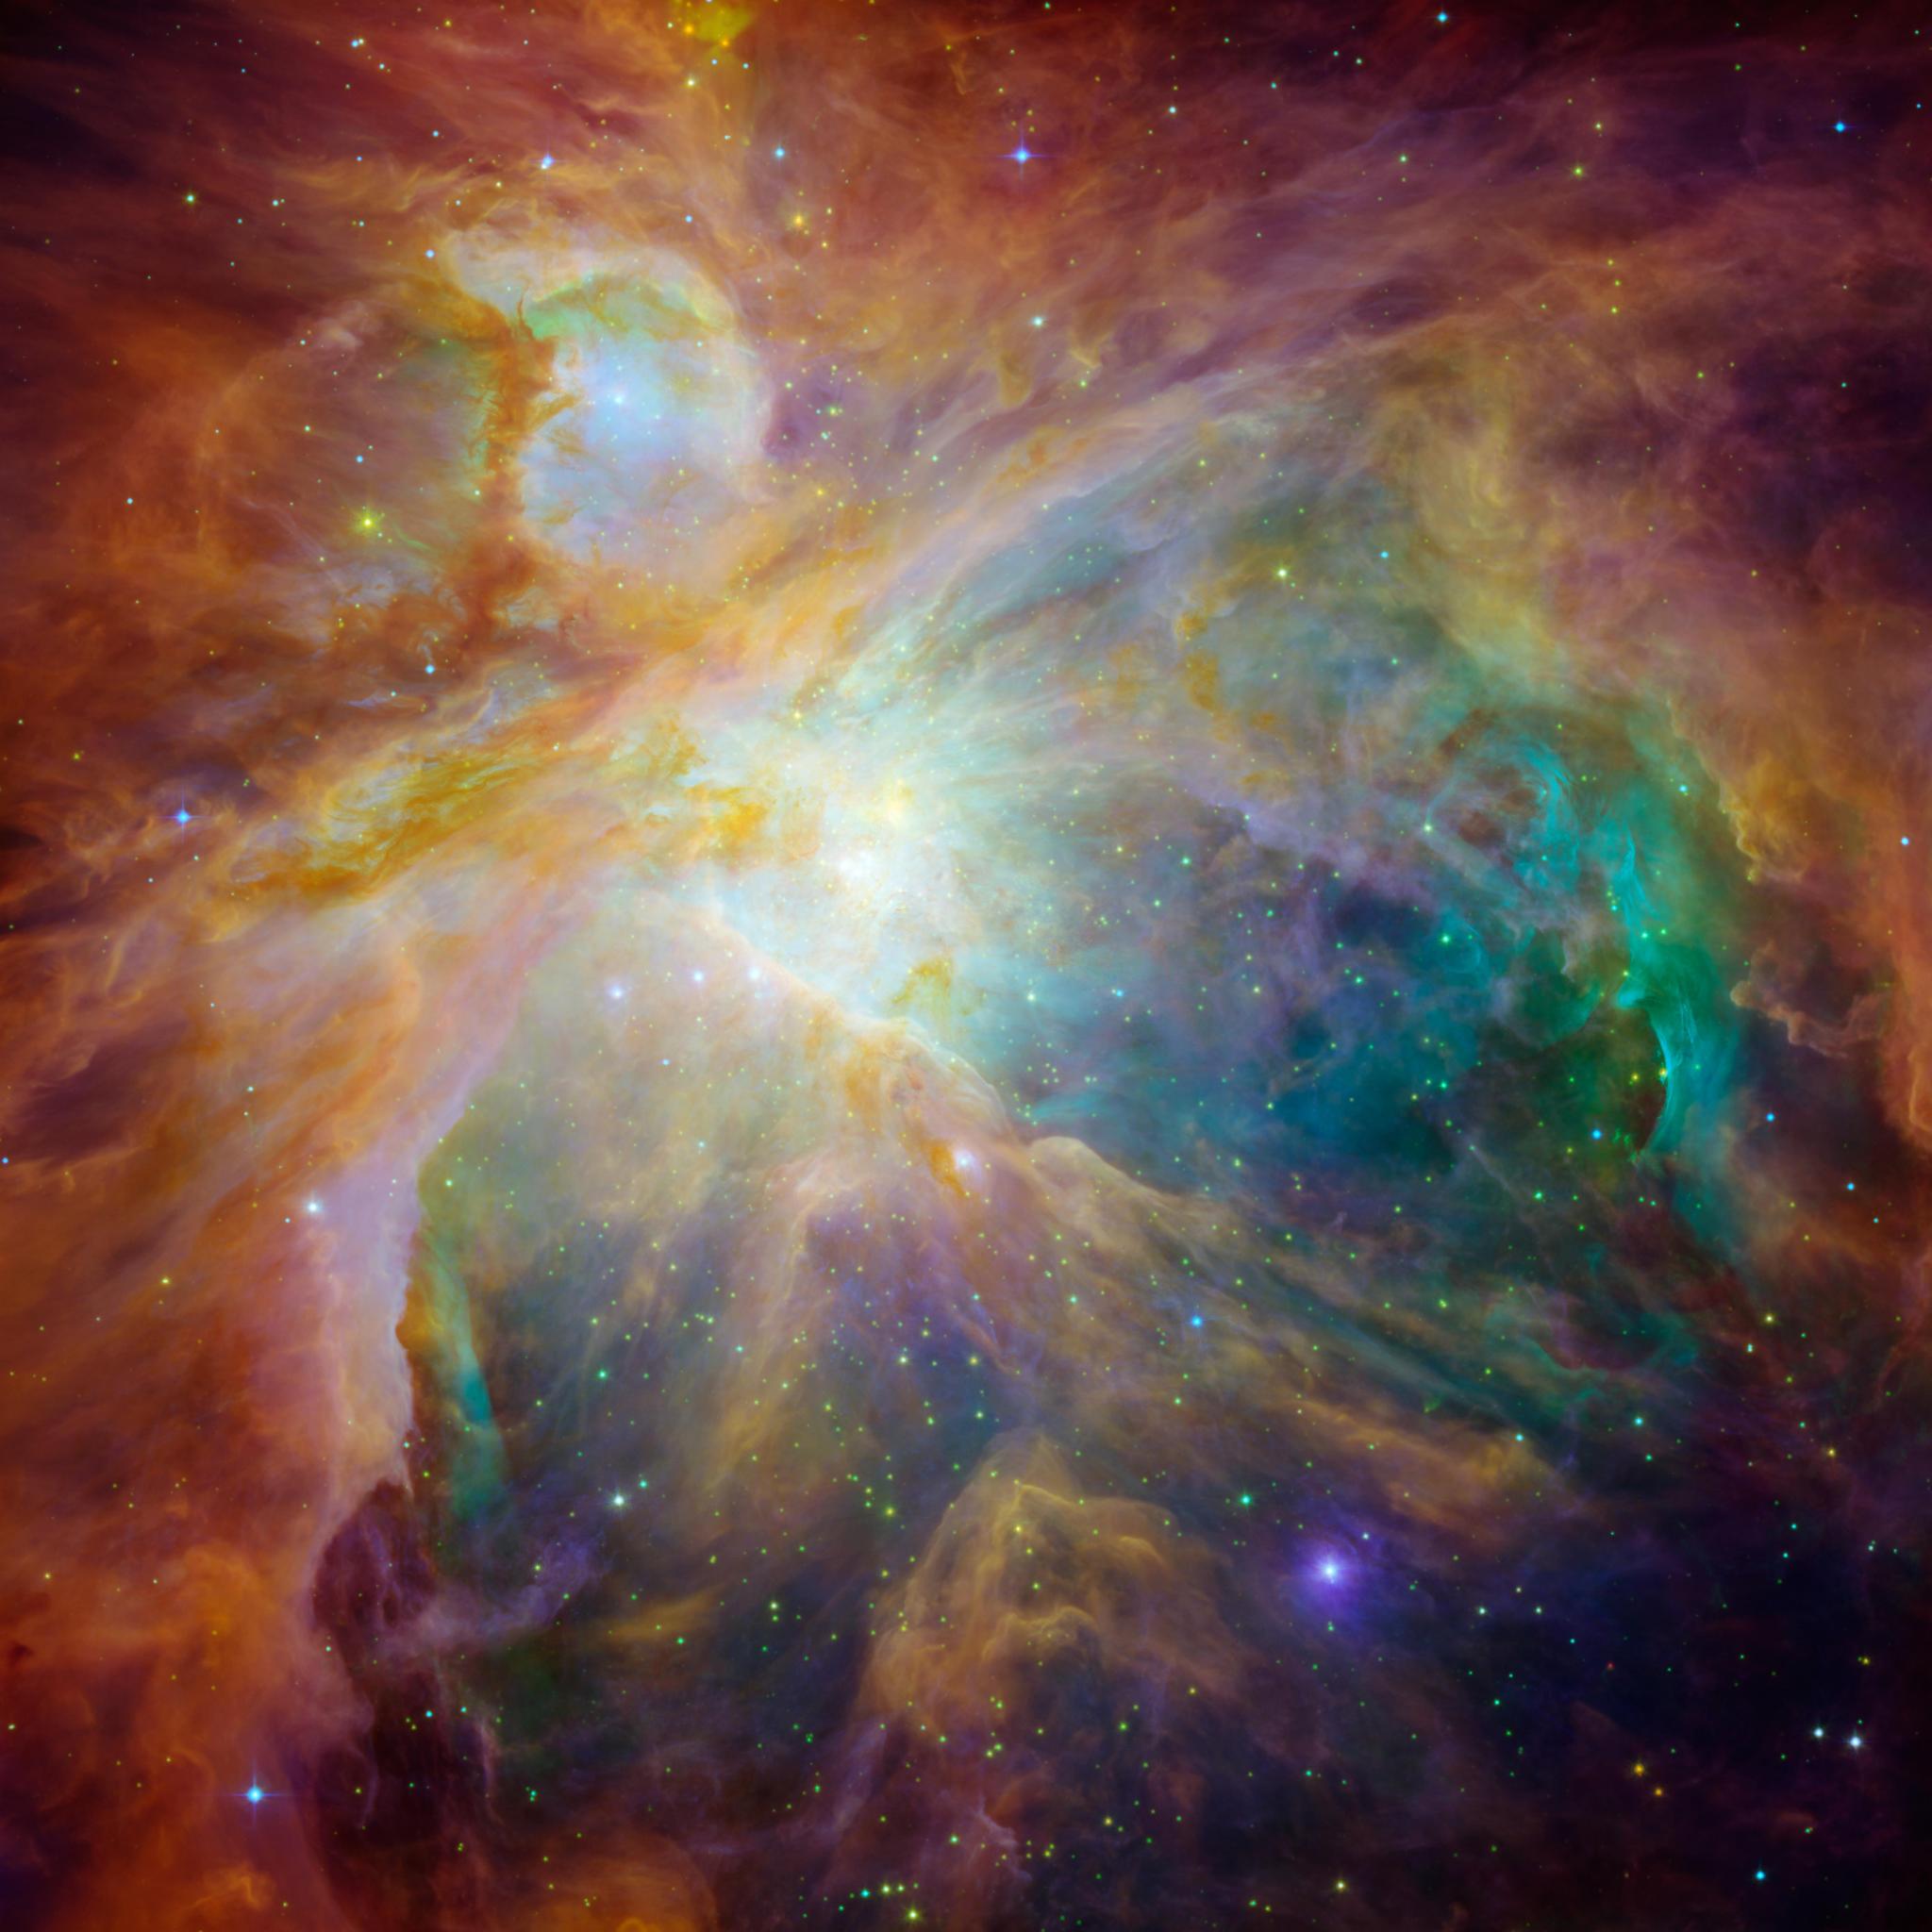 An image of the Orion nebula showing carbon-rich molecules called polycyclic aromatic hydrocarbons (PAHs) as wisps of red and orange 